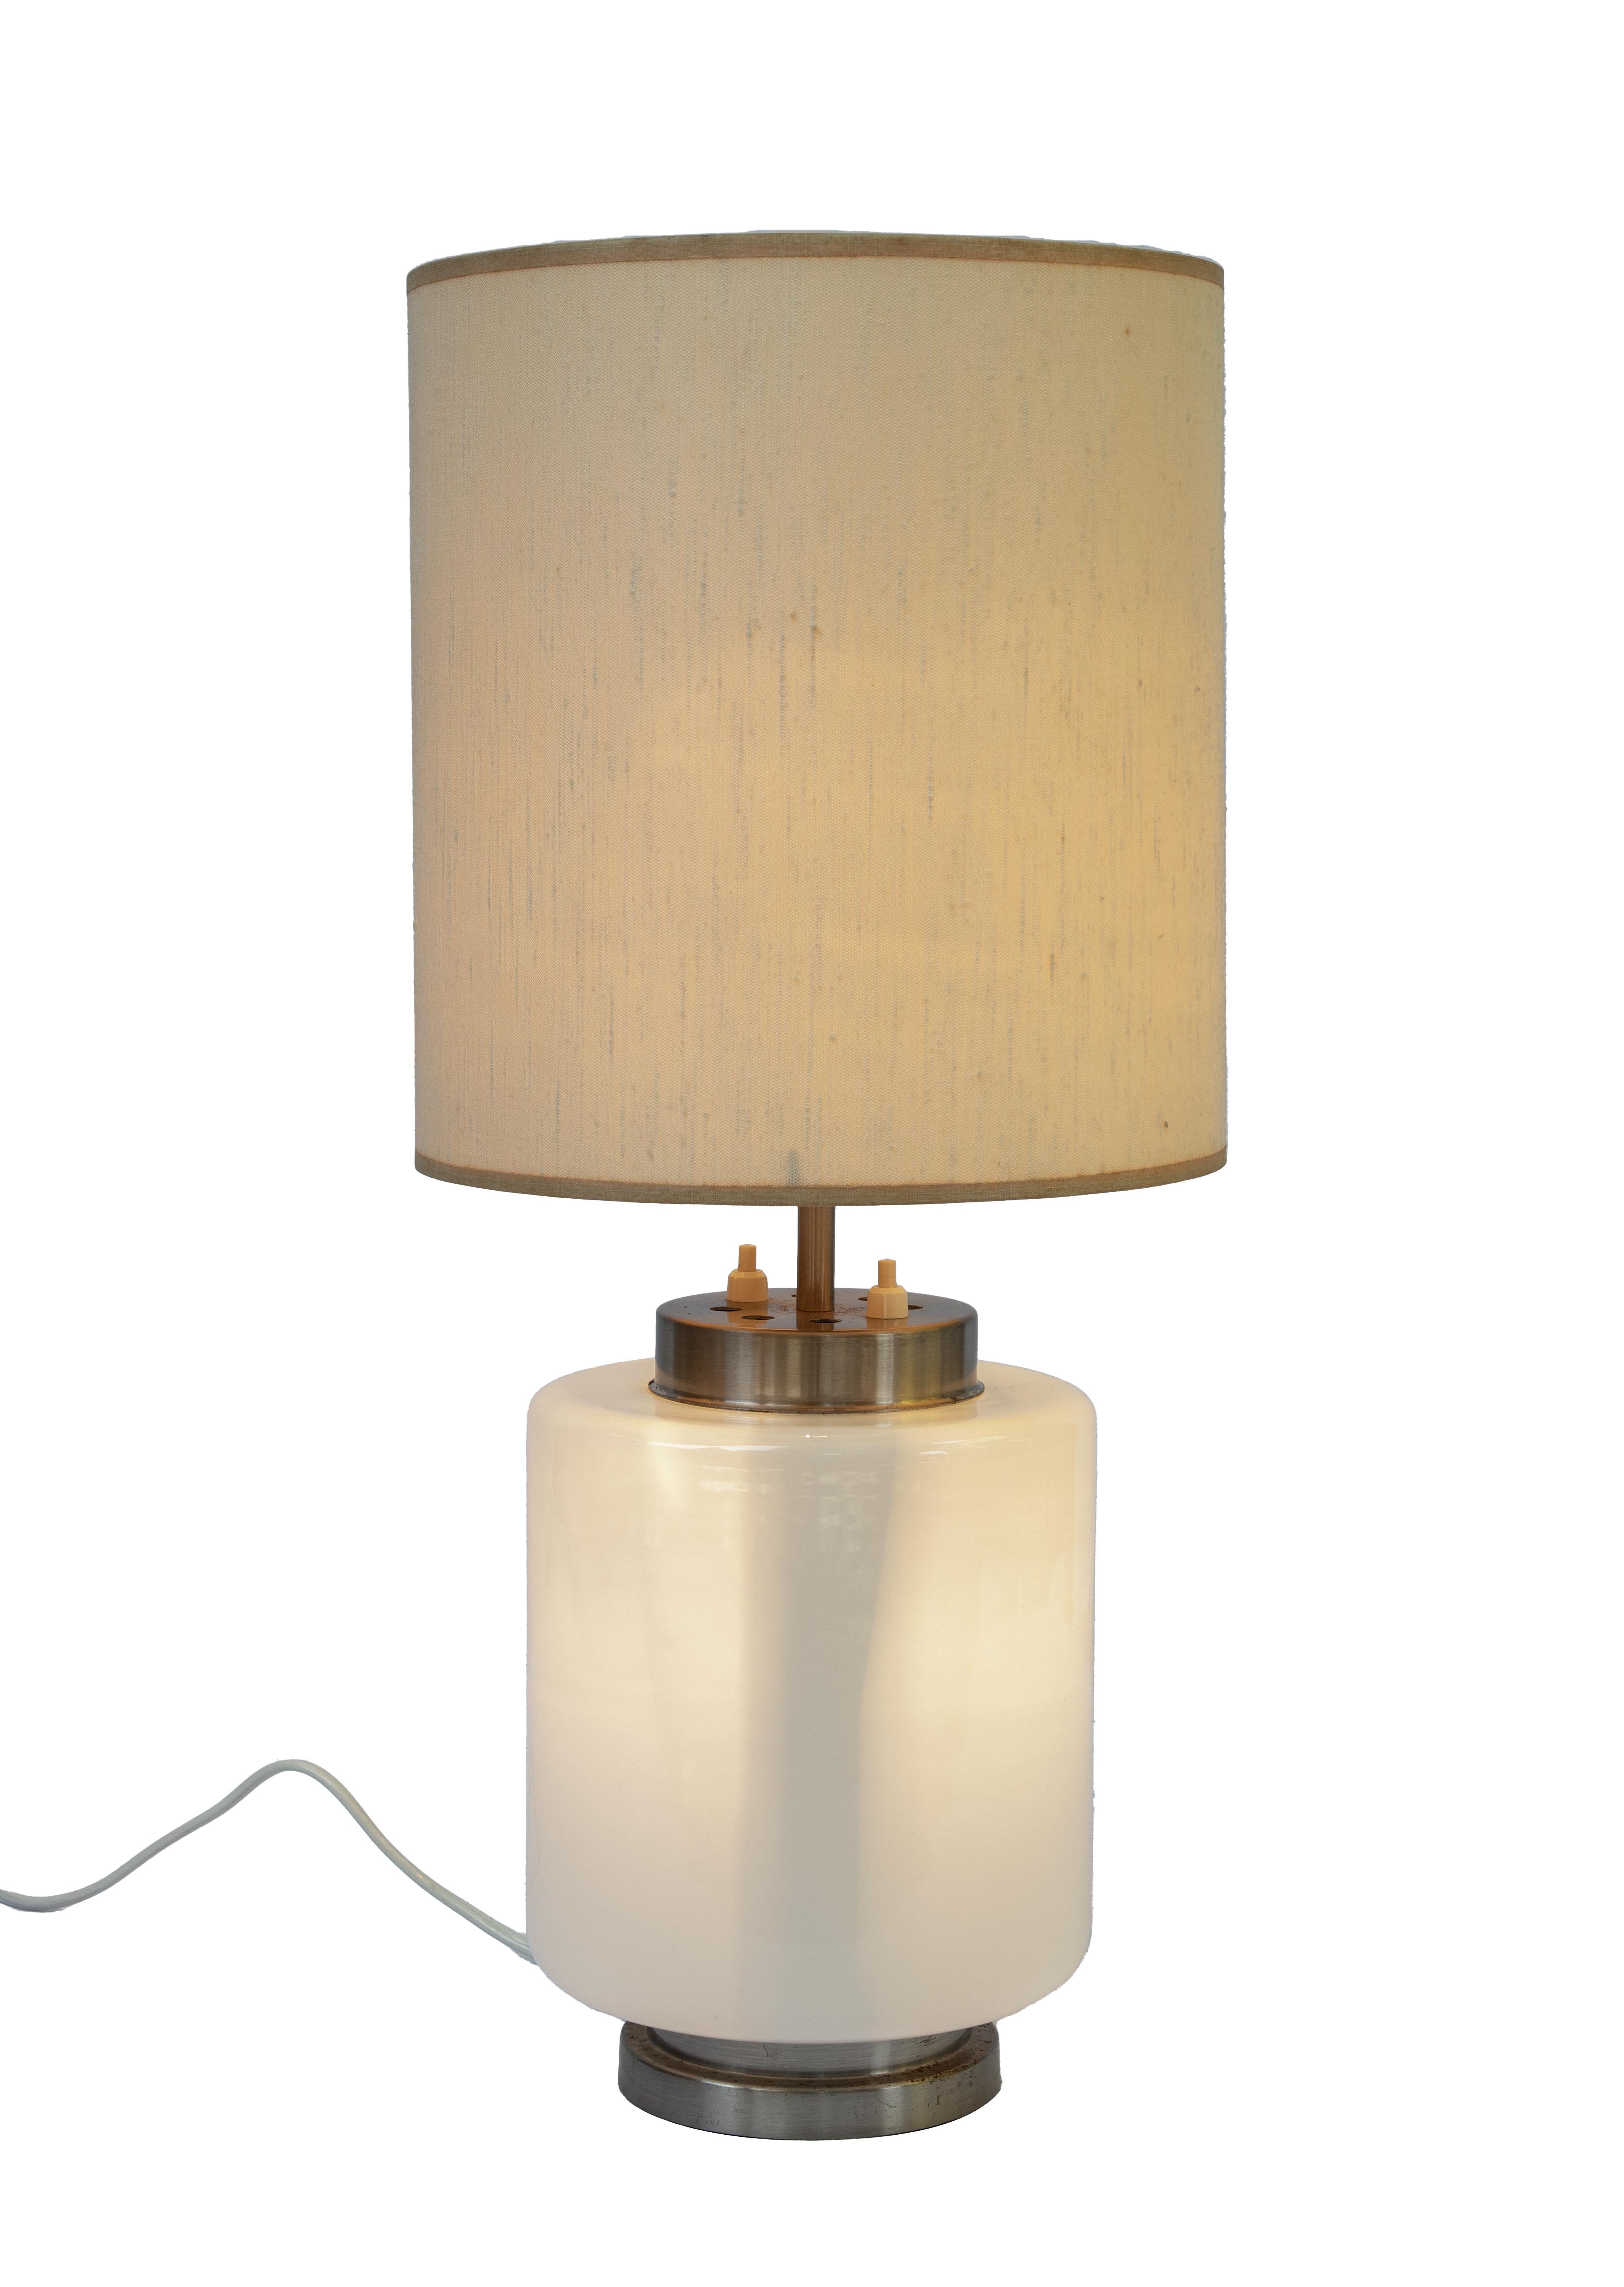 Italian Vintage Table Lamp by Stilnovo, Italy 1960s. For Sale